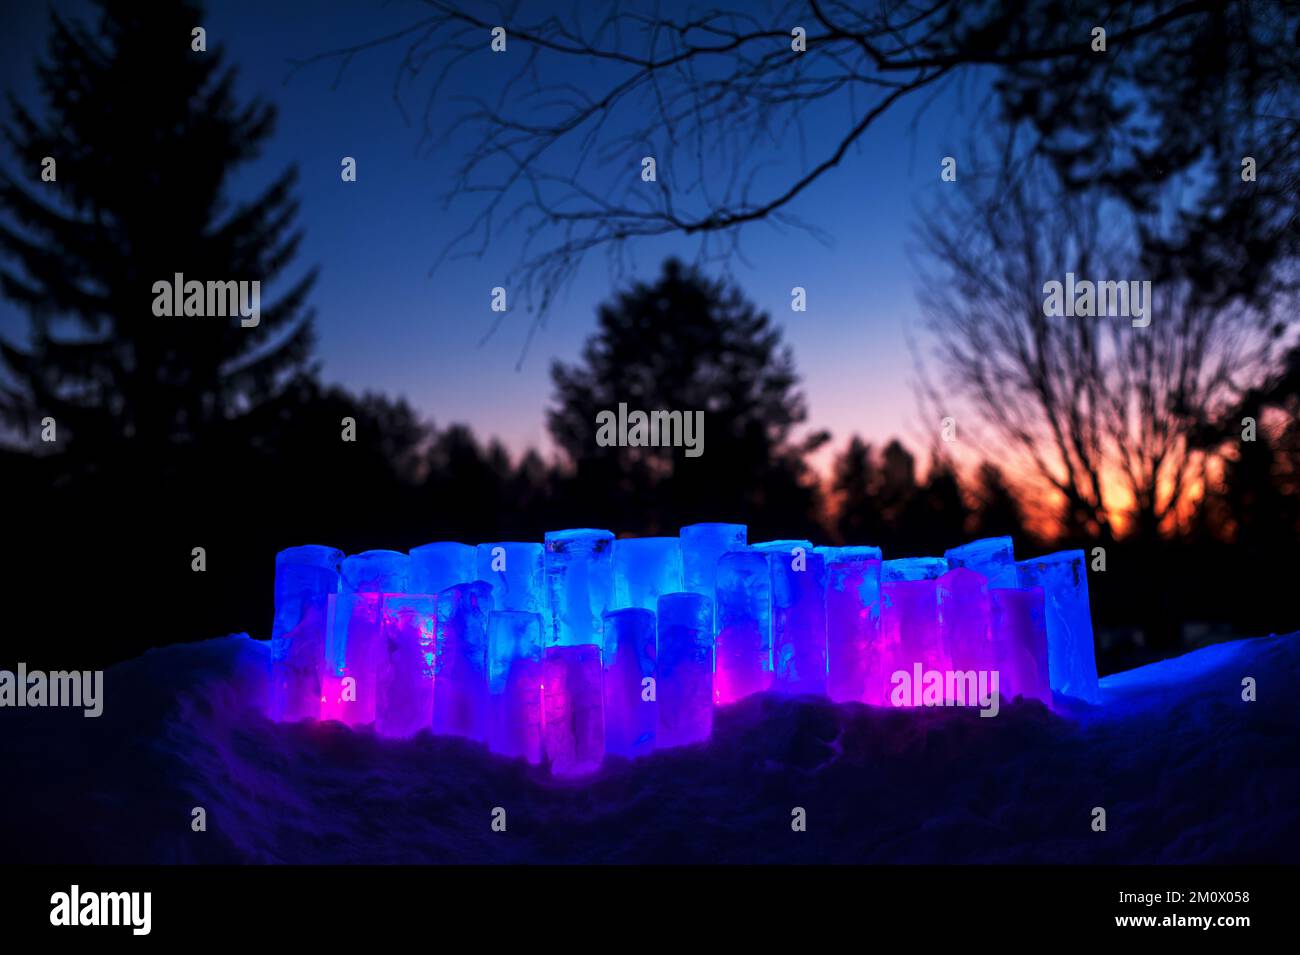 Ice lanterns with led lights in snow. Winter evening in the garden. Stock Photo